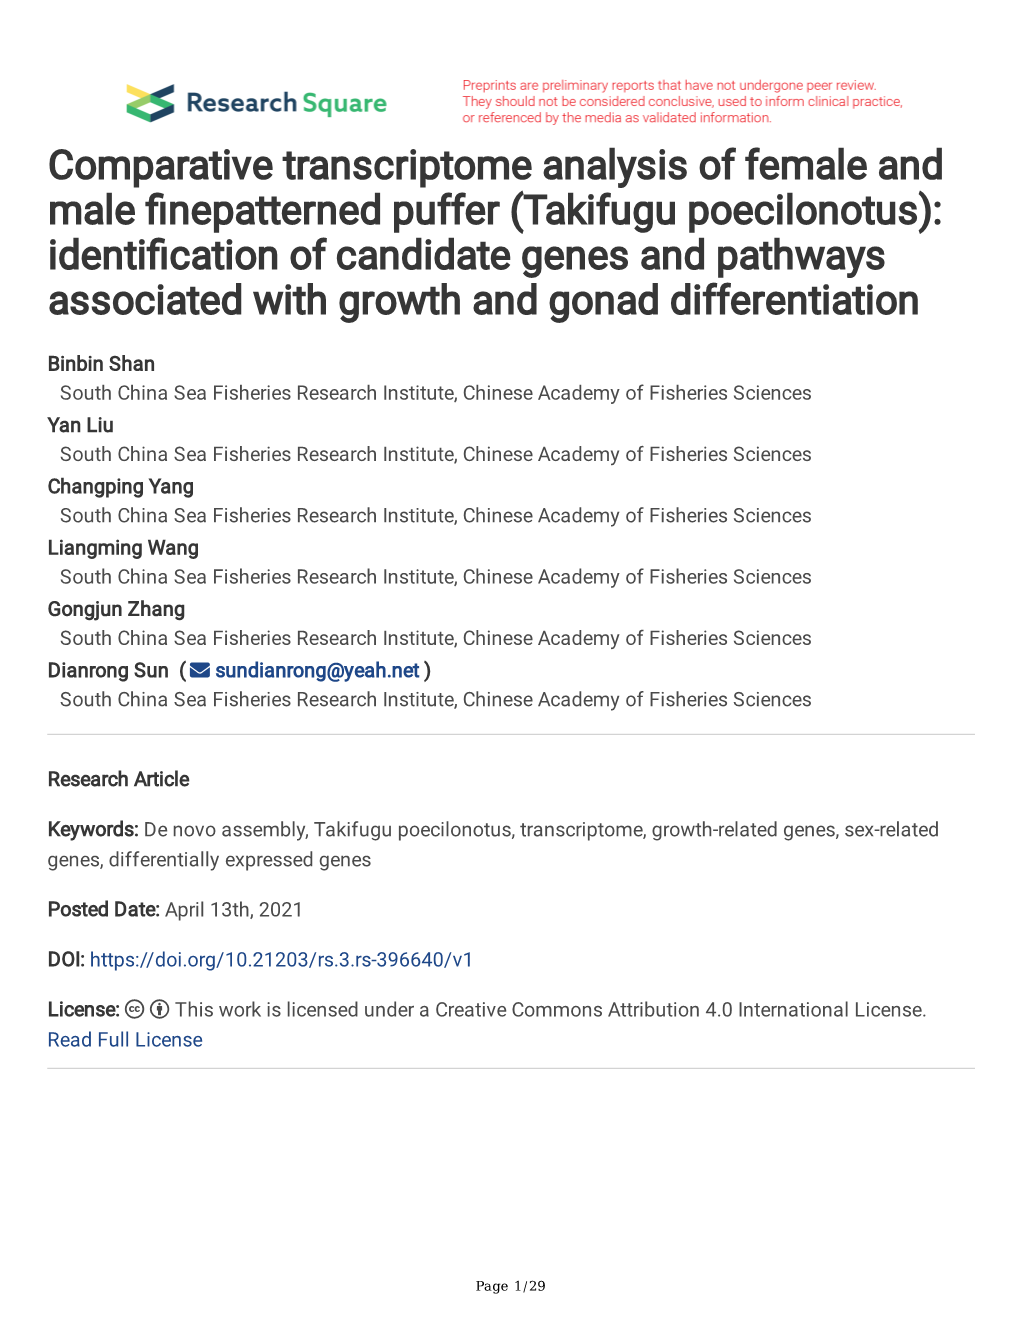 Takifugu Poecilonotus): Identifcation of Candidate Genes and Pathways Associated with Growth and Gonad Differentiation